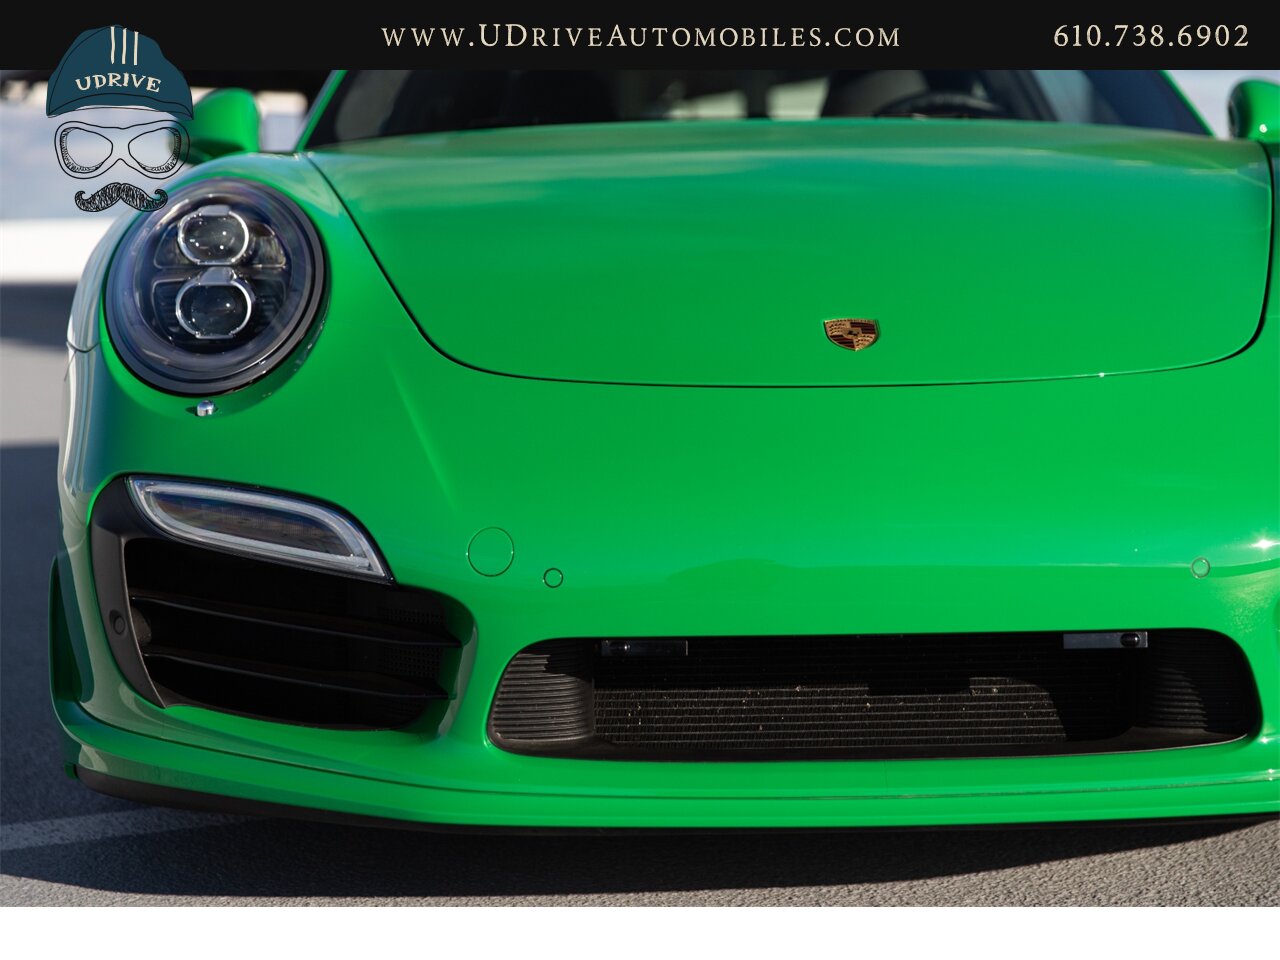 2016 Porsche 911 Turbo S PTS Viper Green Aerokit $203k MSRP  Painted Side Skirts Painted Grilles Wheels in Black - Photo 12 - West Chester, PA 19382